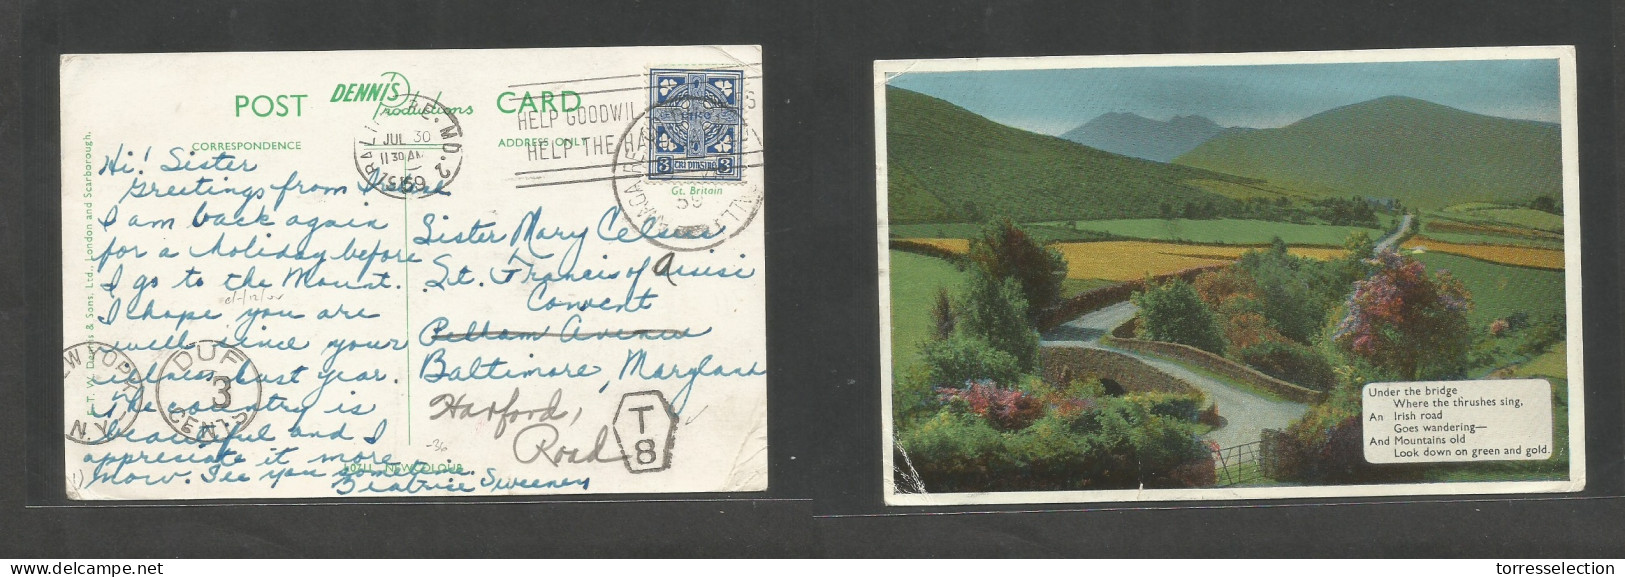 EIRE. 1959. Color Fkd Ppc. Amagare - USA, Baltimore (30 July) Via NYC, Taxed, Due Irish "T8" Scarce Cachet. Fine. - Oblitérés